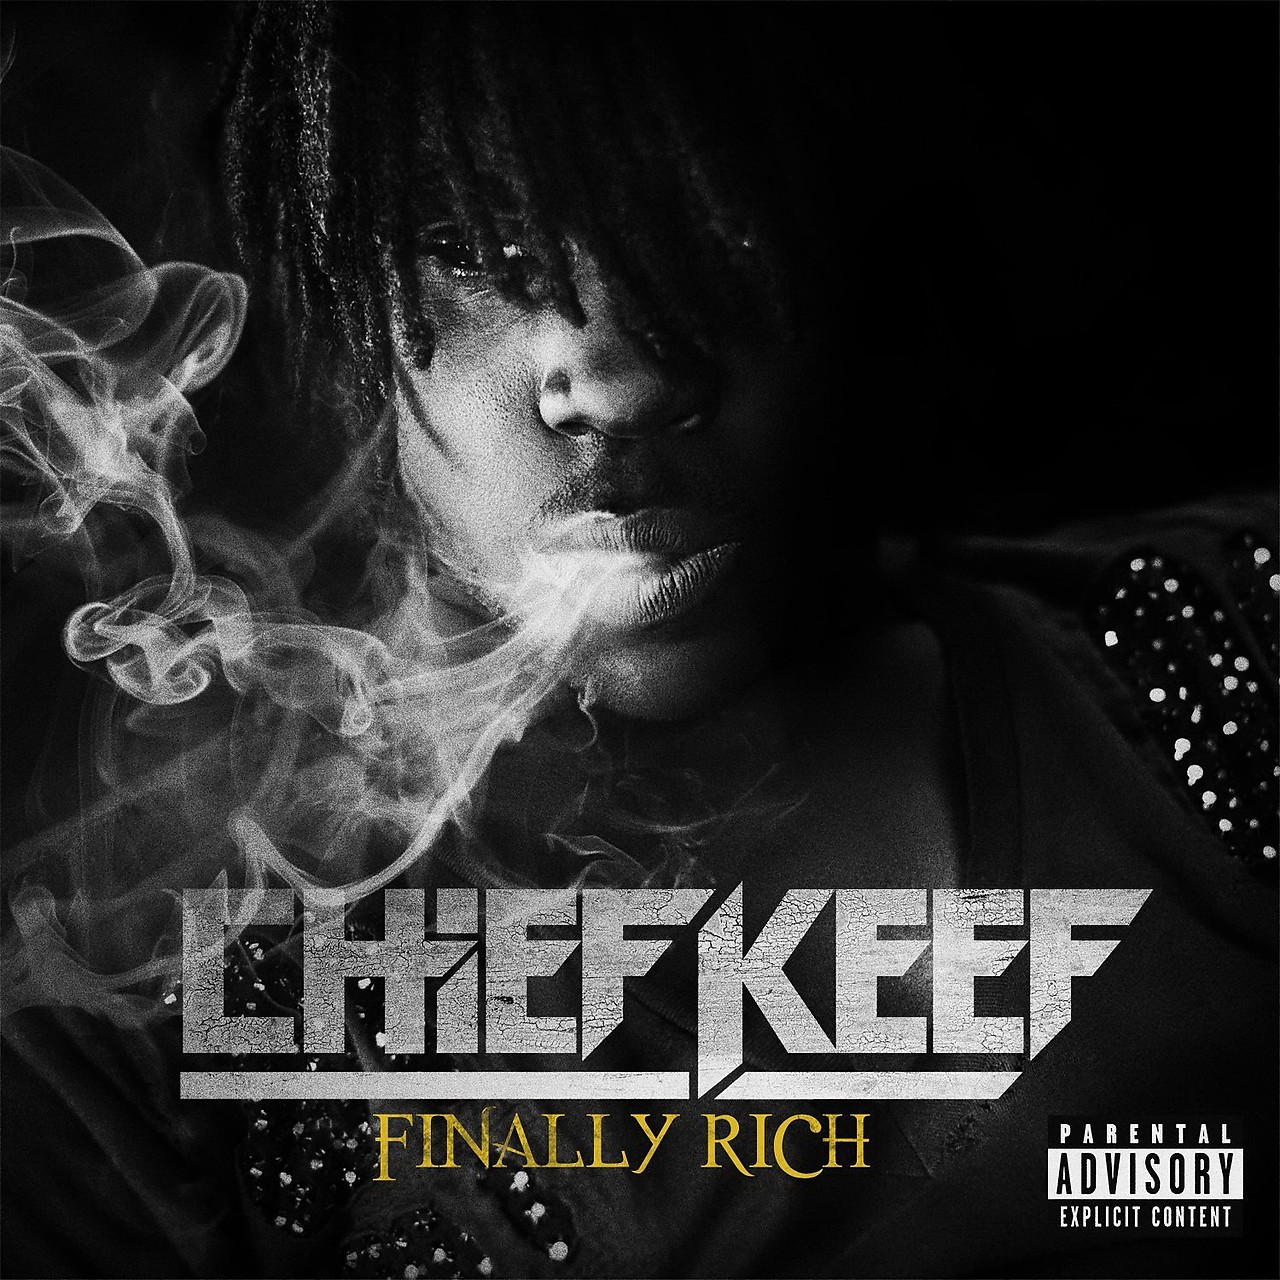 chief keef albums covers